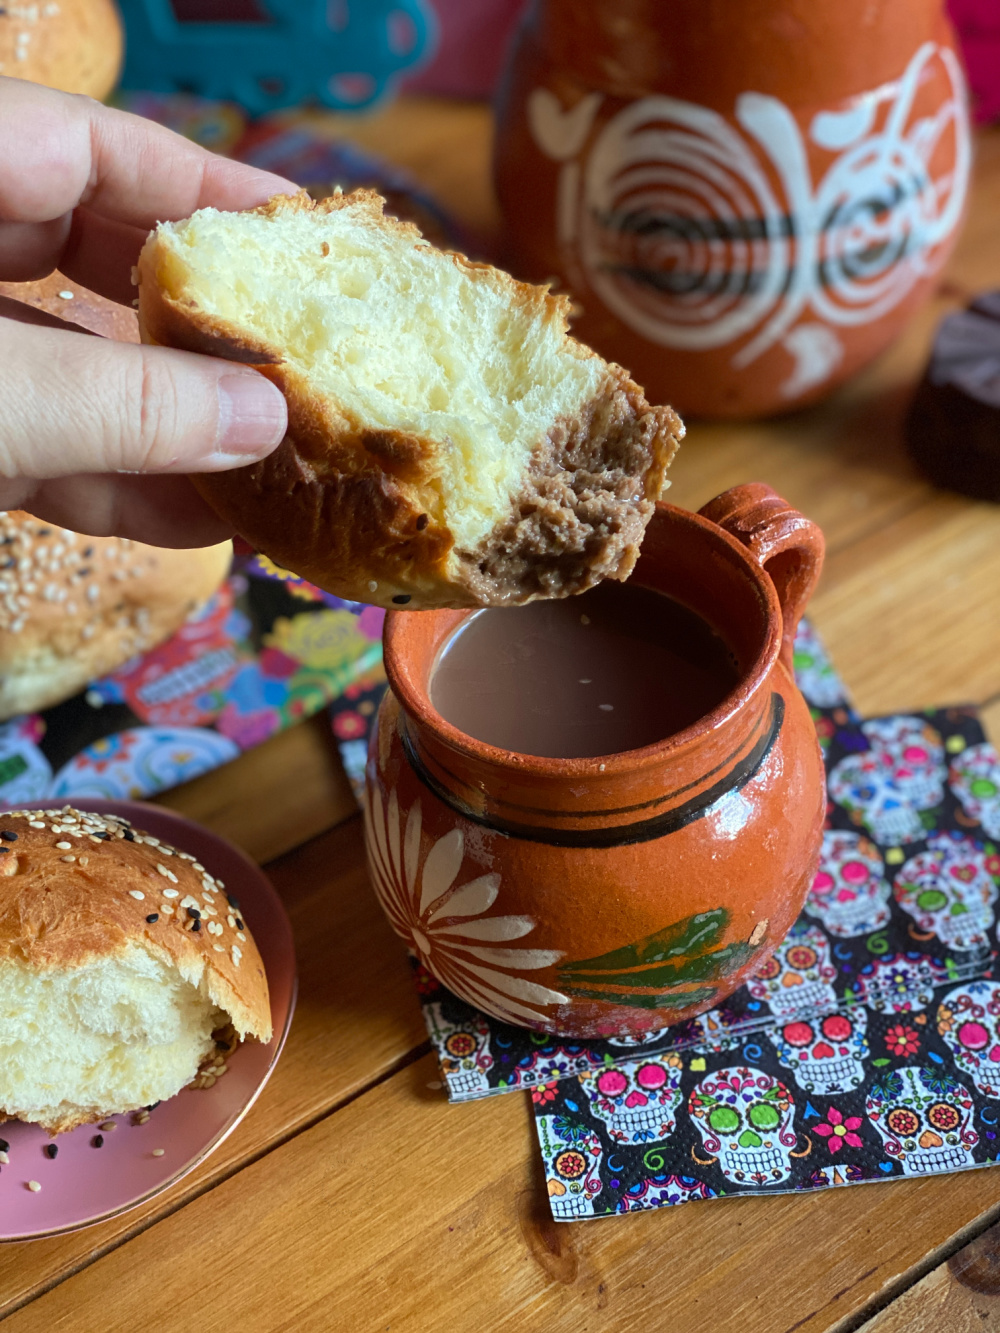 showing how to soak the bread in hot chocolate